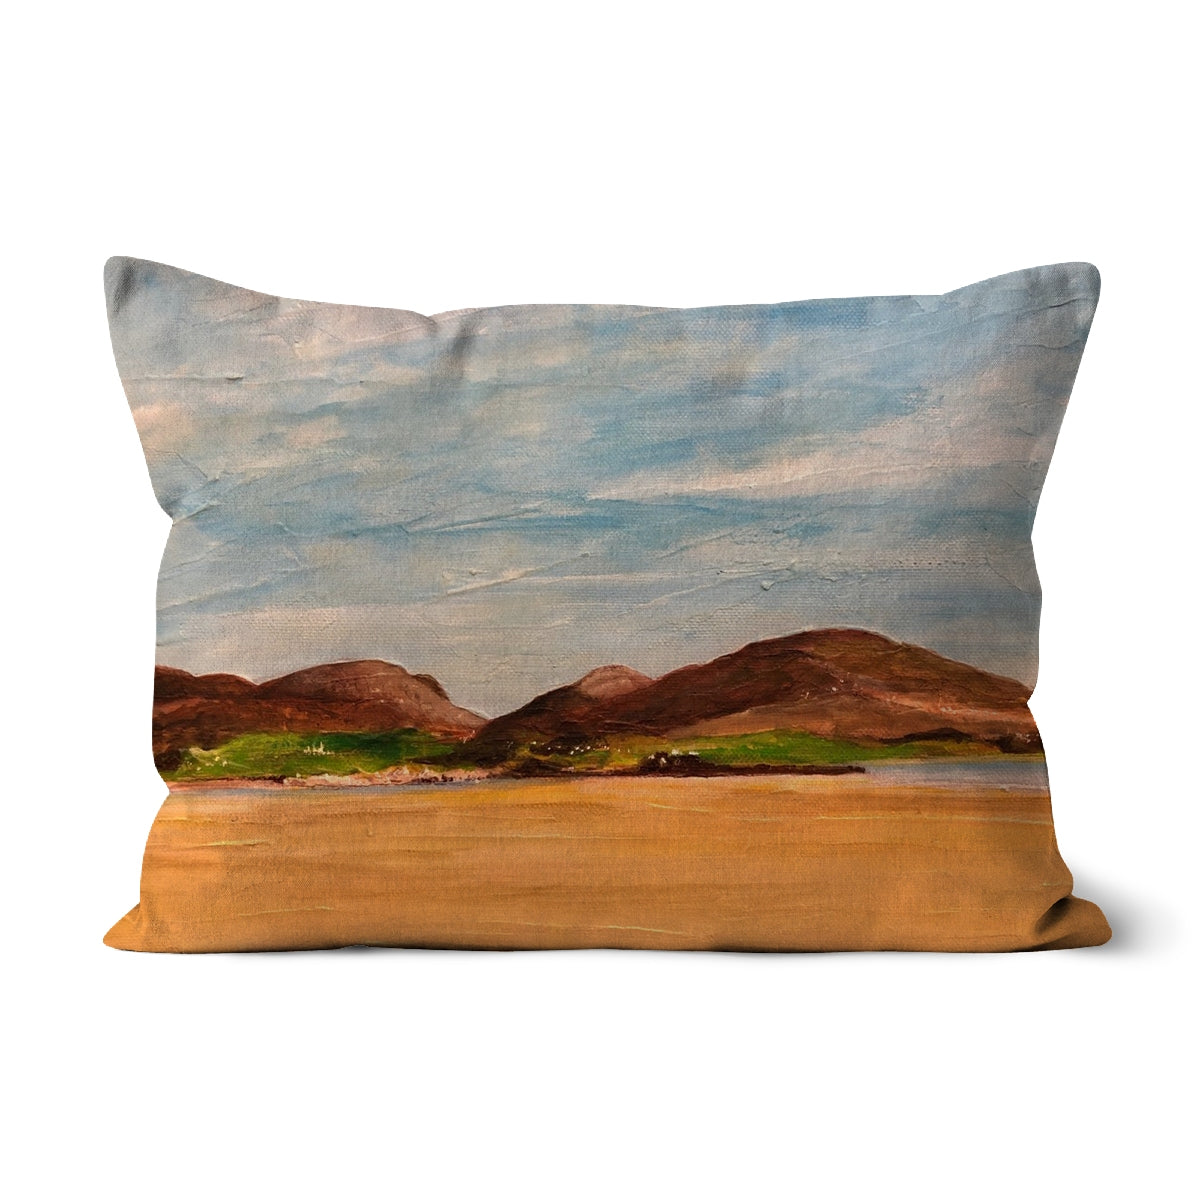 Uig Sands Lewis Art Gifts Cushion-Cushions-Hebridean Islands Art Gallery-Canvas-19"x13"-Paintings, Prints, Homeware, Art Gifts From Scotland By Scottish Artist Kevin Hunter